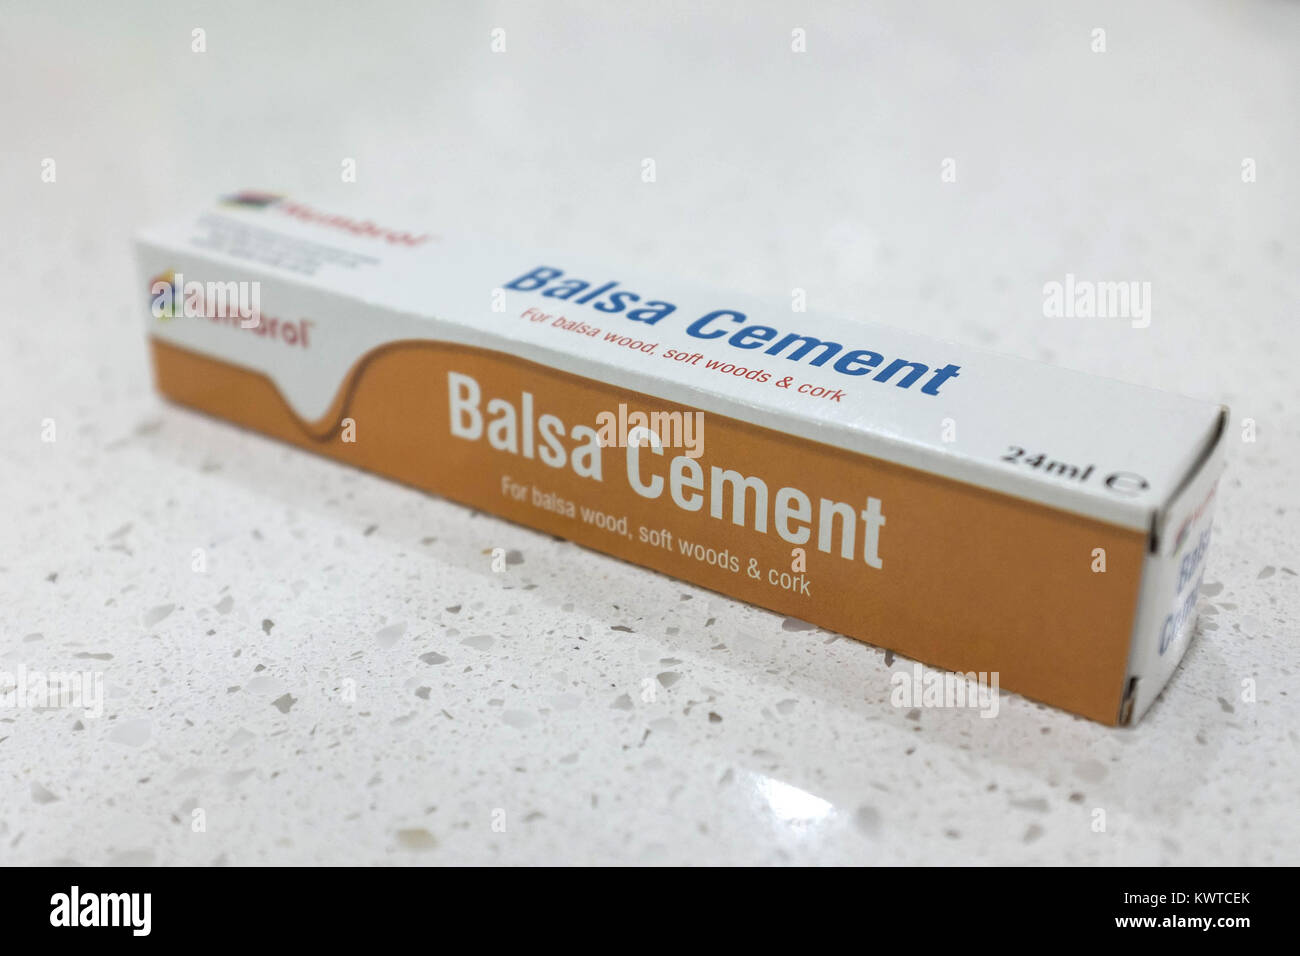 Balsa cement for modelling Stock Photo